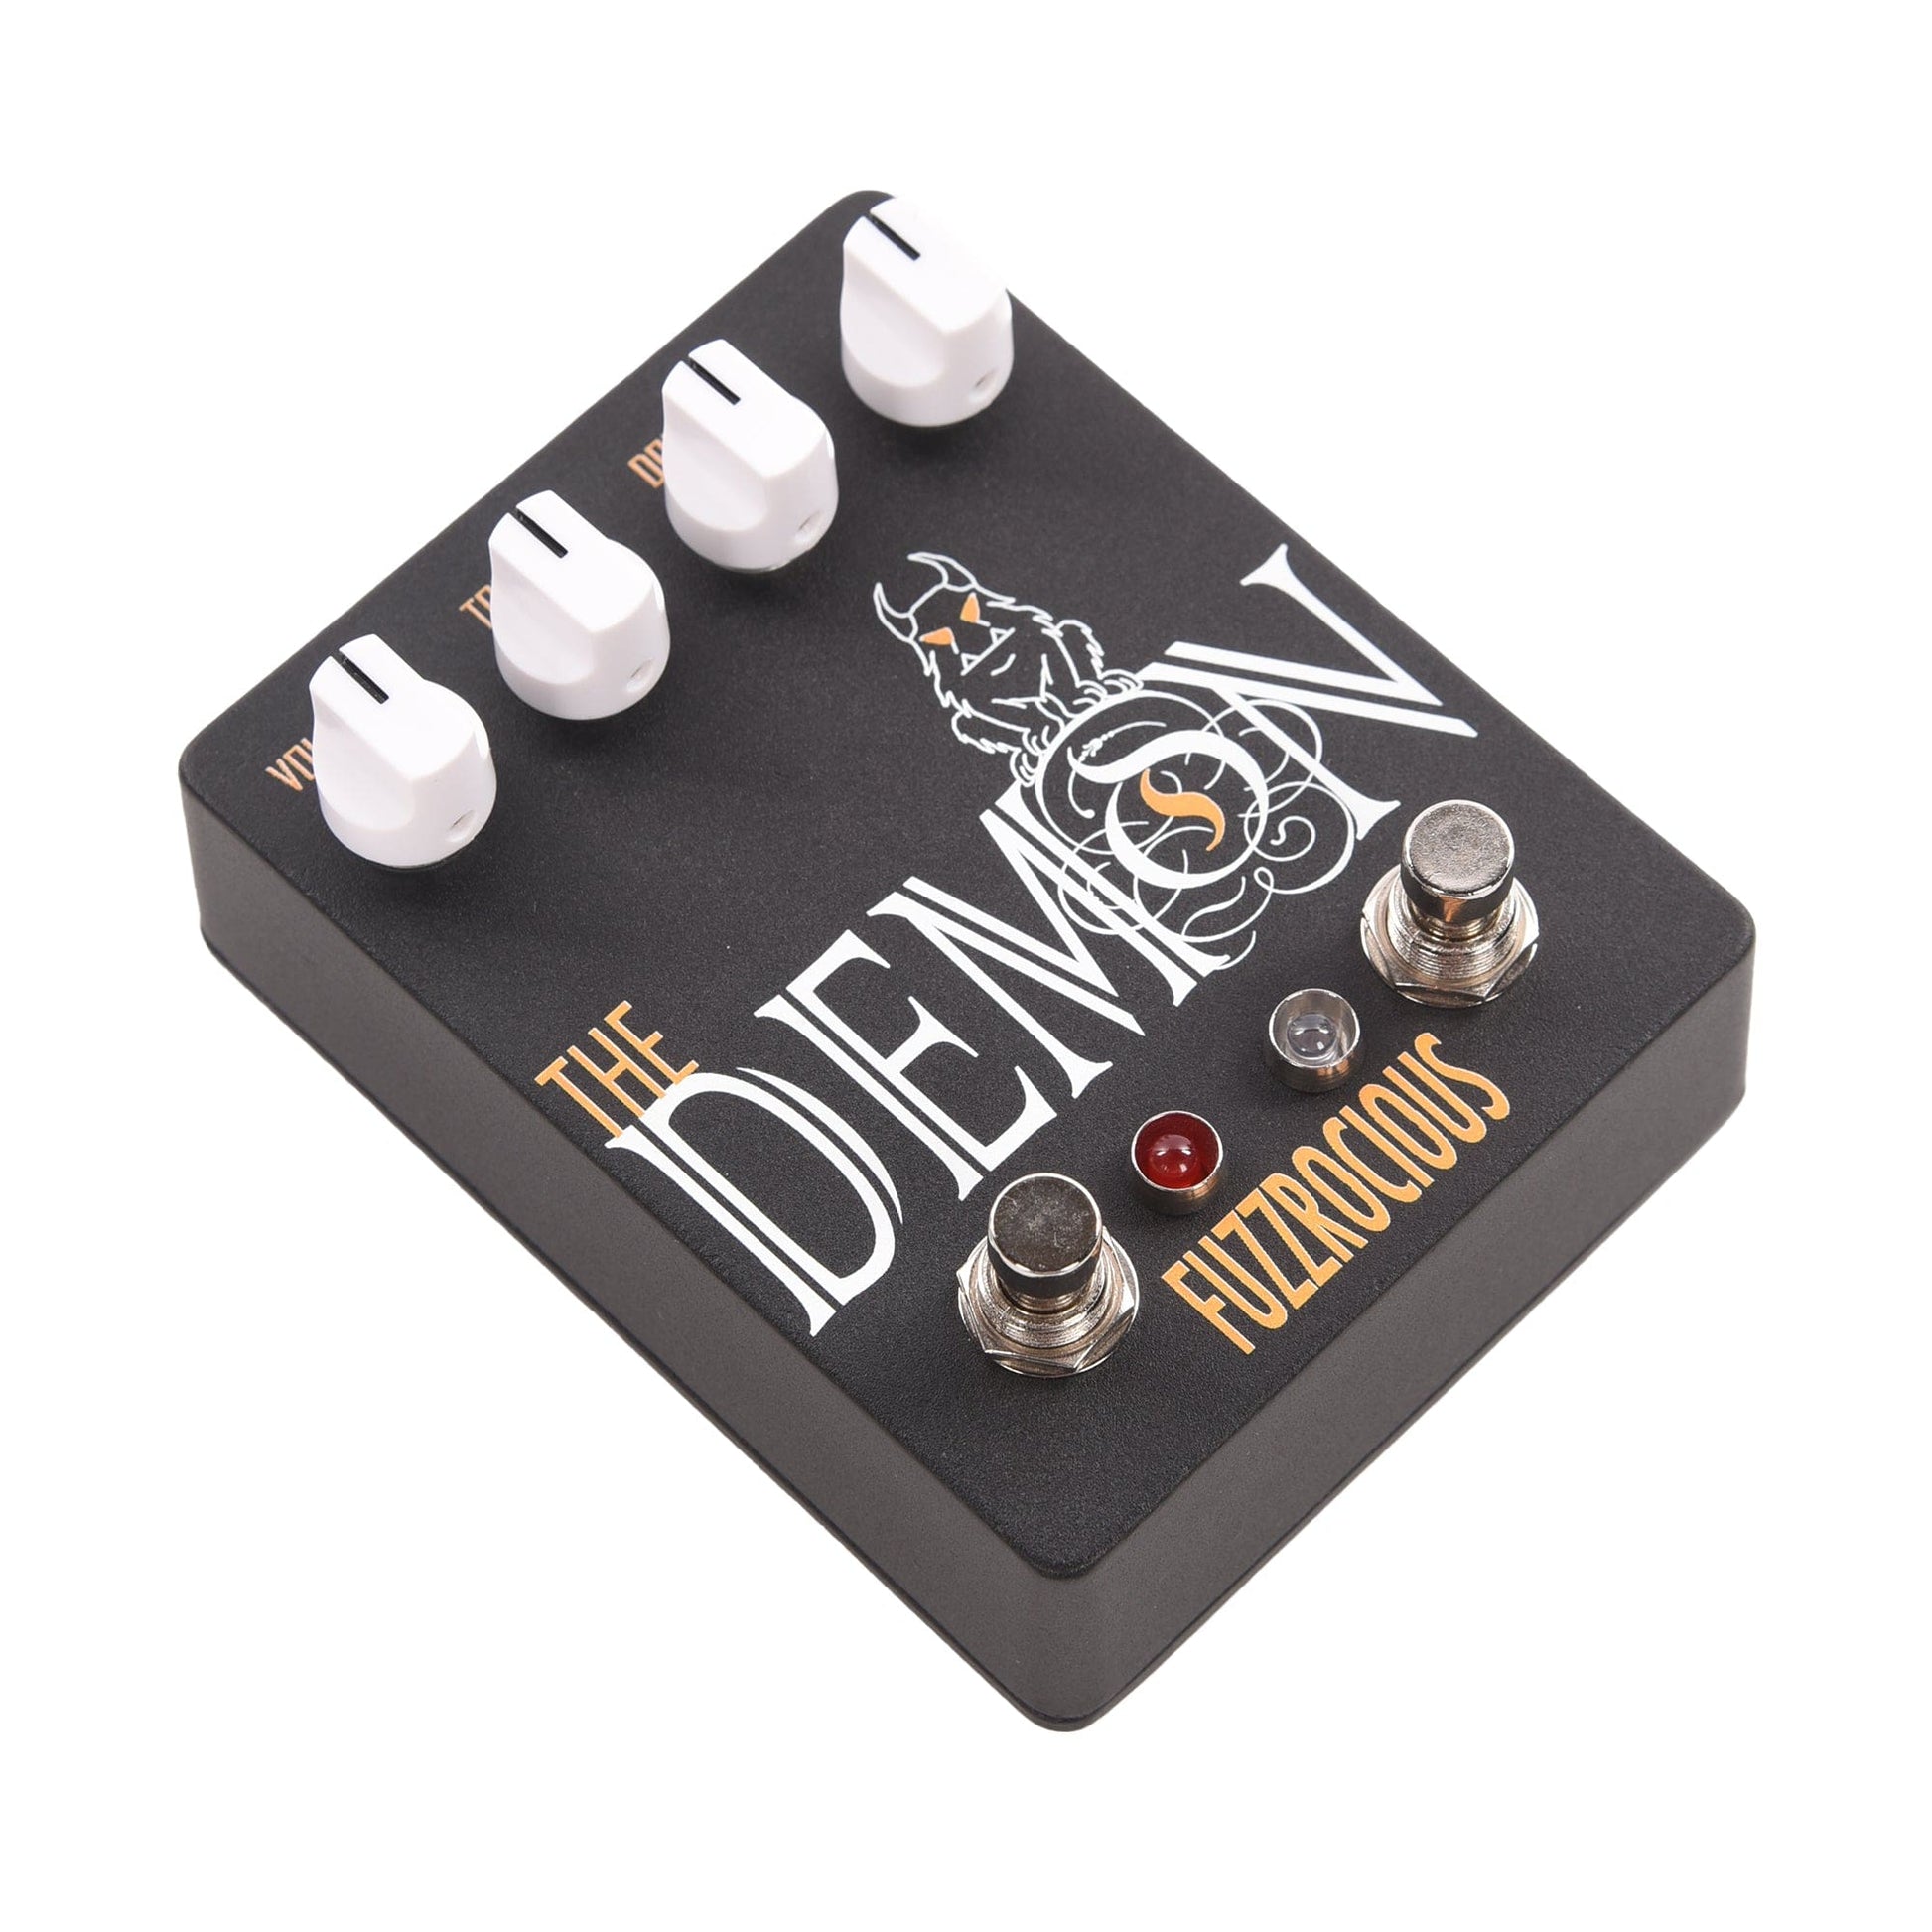 Fuzzrocious Demon Med/High Overdrive w/2nd Drive Mod CME Exclusive Black/Orange Effects and Pedals / Overdrive and Boost